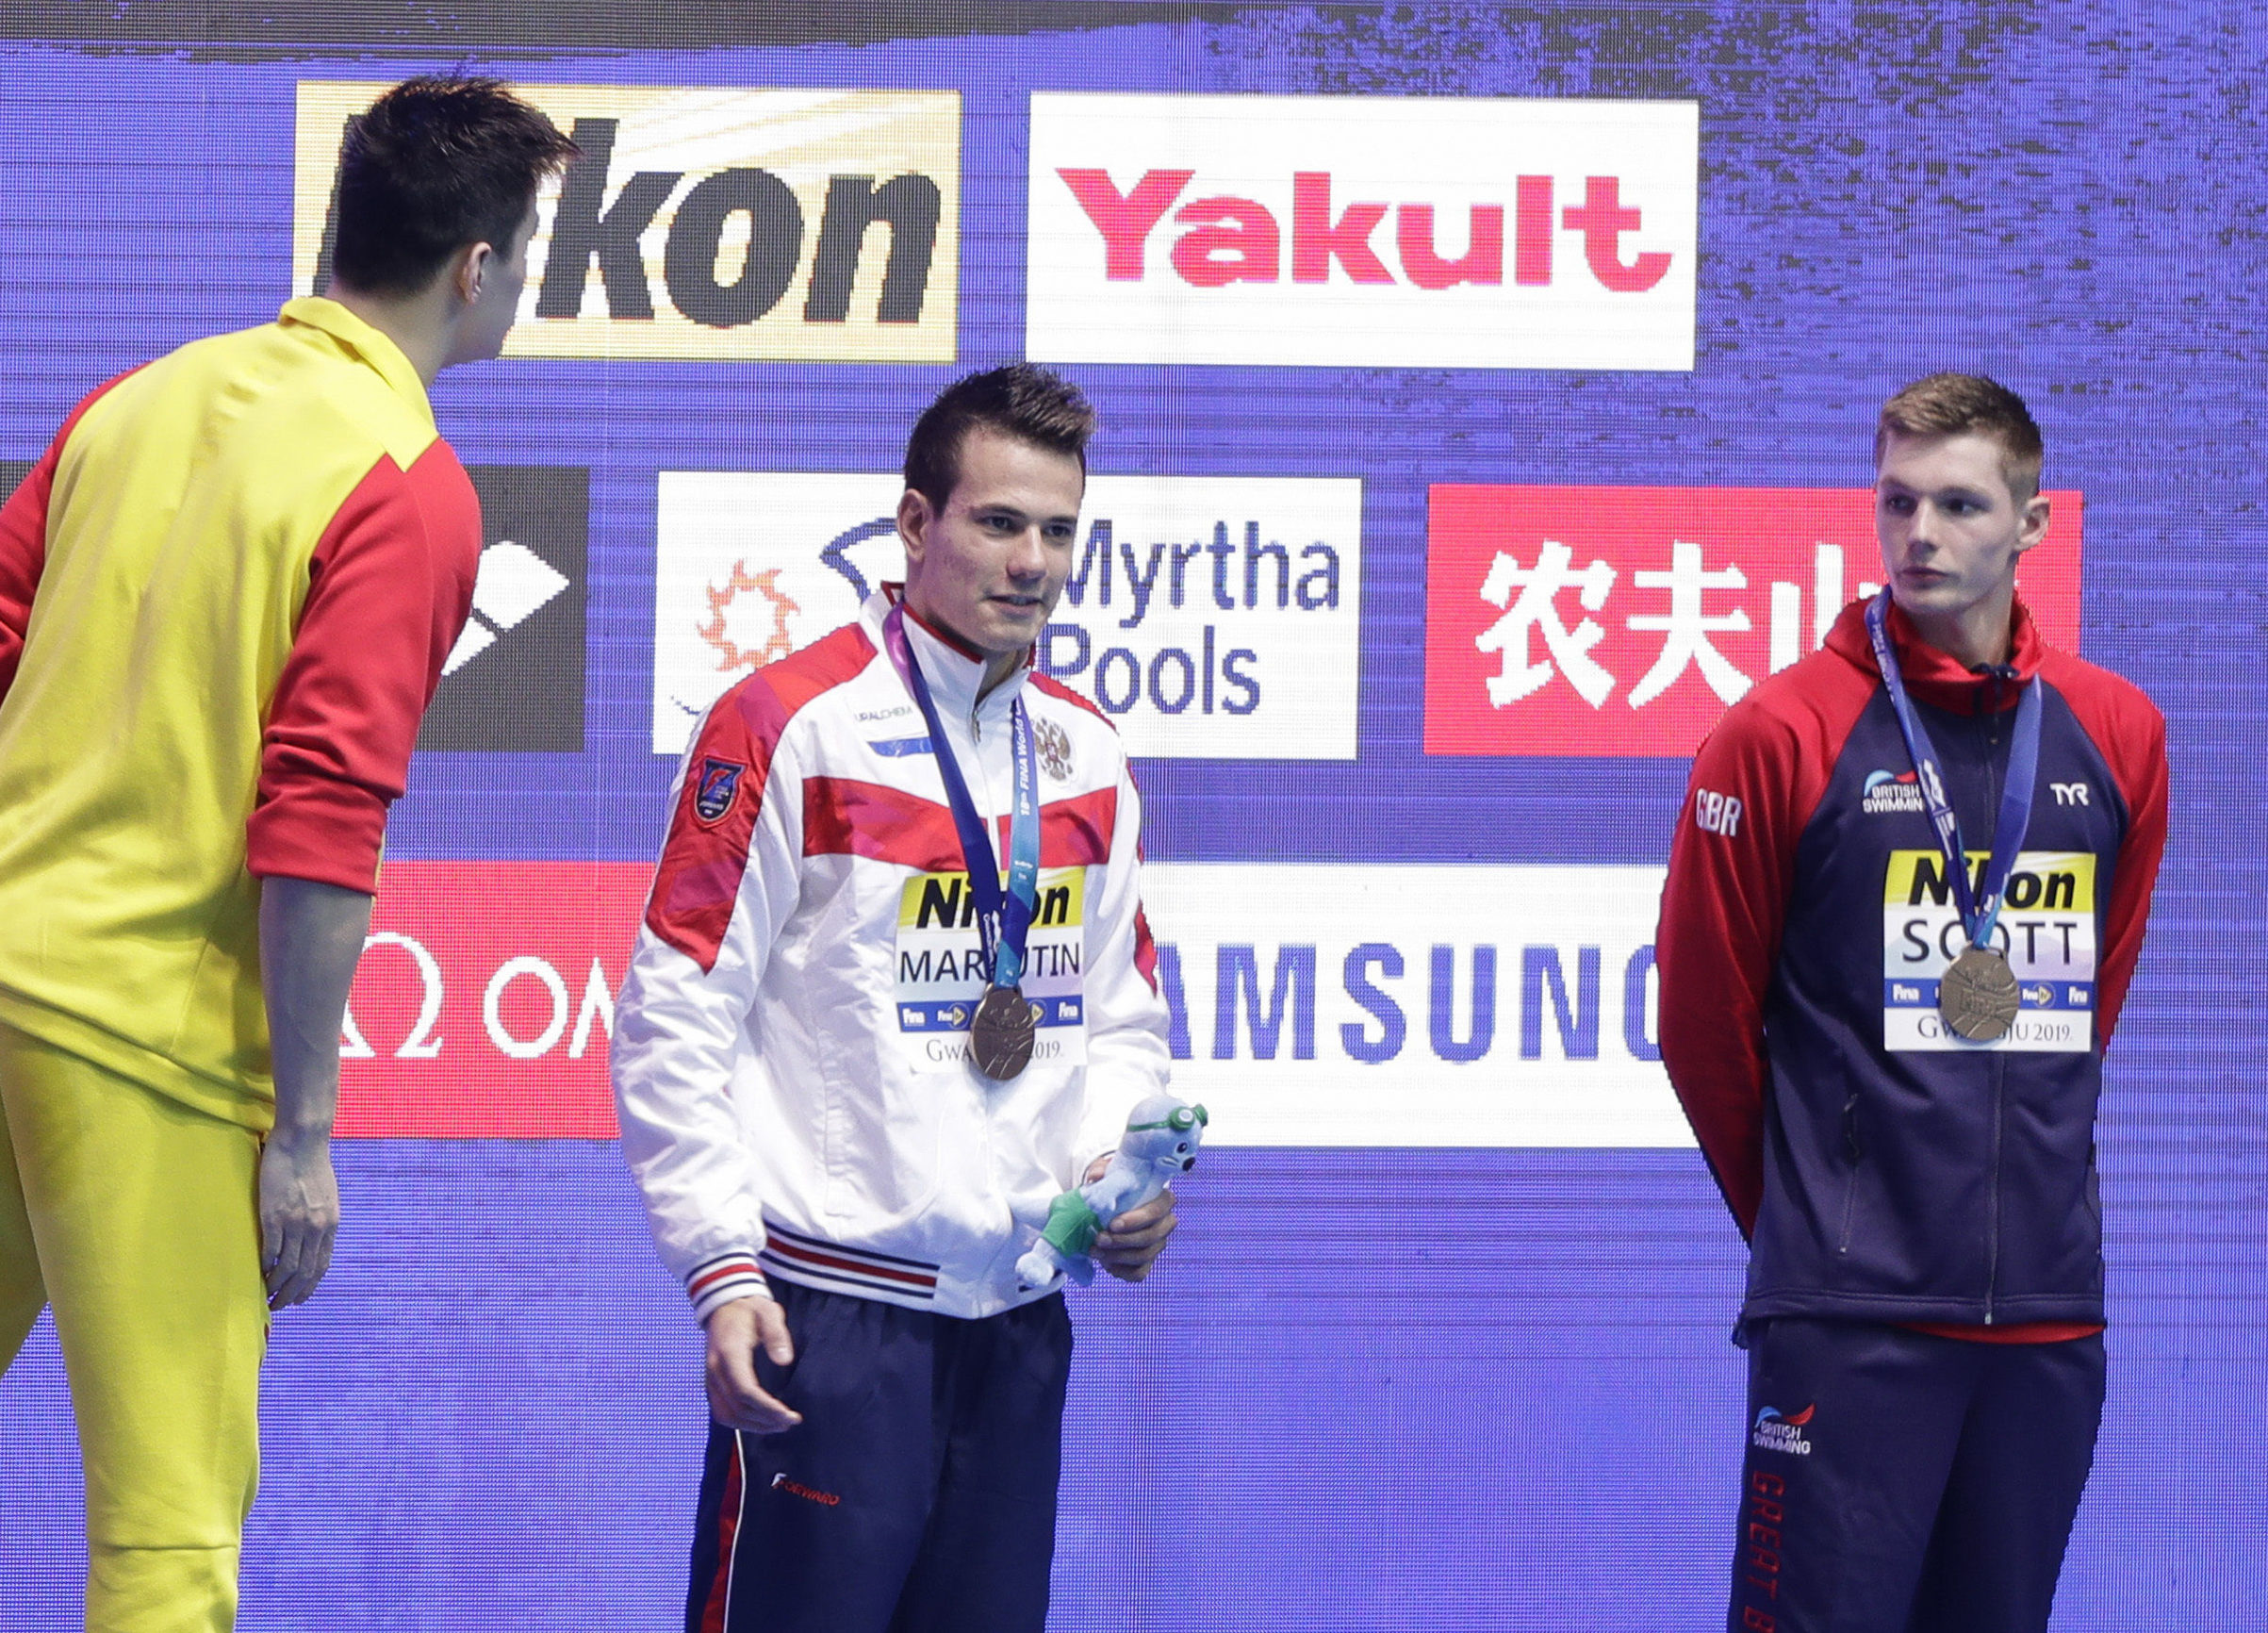 Duncan Scott keeps his distance from China's Sun Yang.